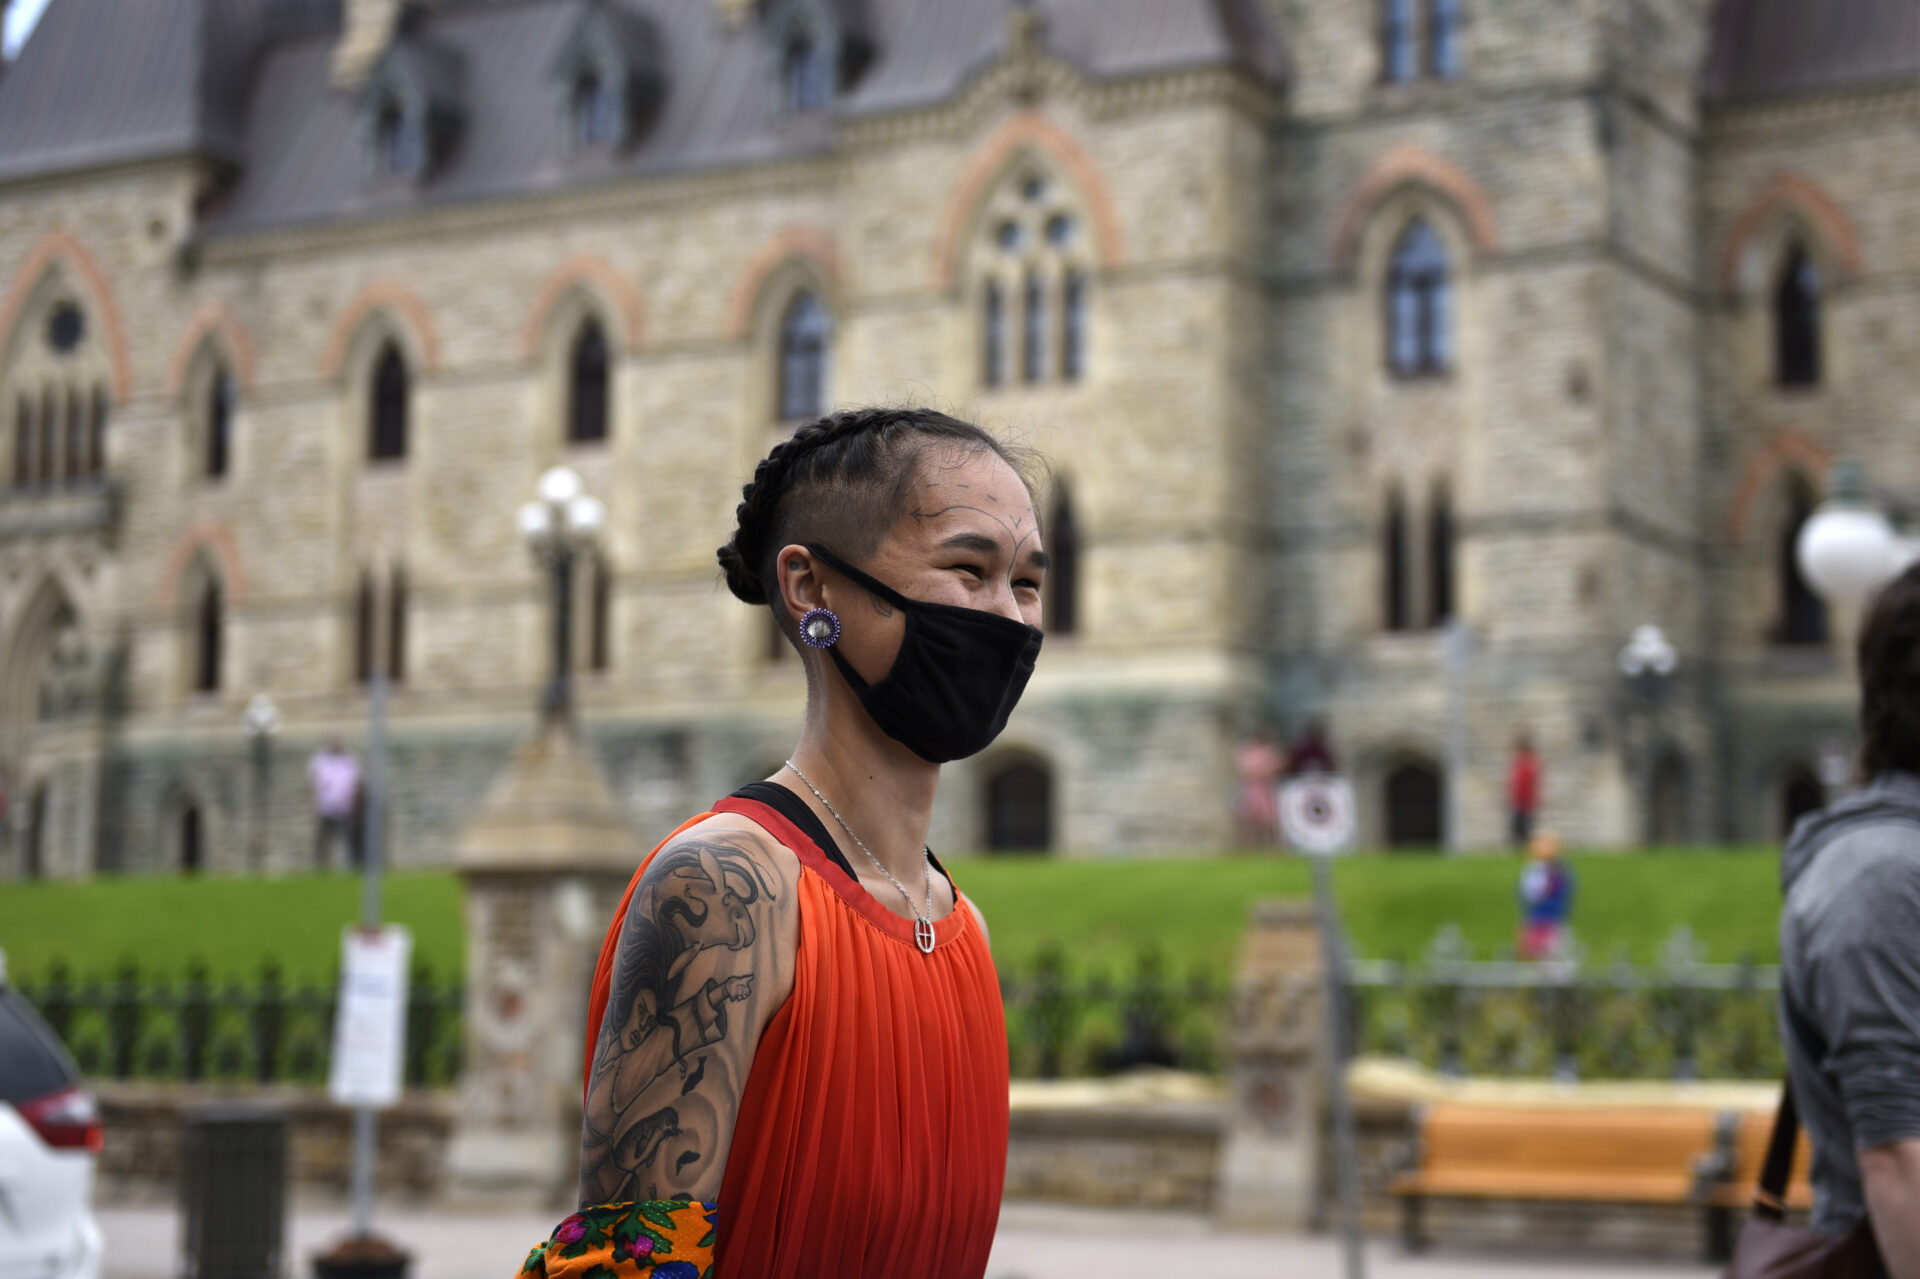 Qaqqaq is wearing a black mask. Her hear is shaved on the side and braided tightly on the rest of her head. She is wearing an orange sleeveless top showing tattoos covering all of her right arm. It looks like she is smiling under the mask.